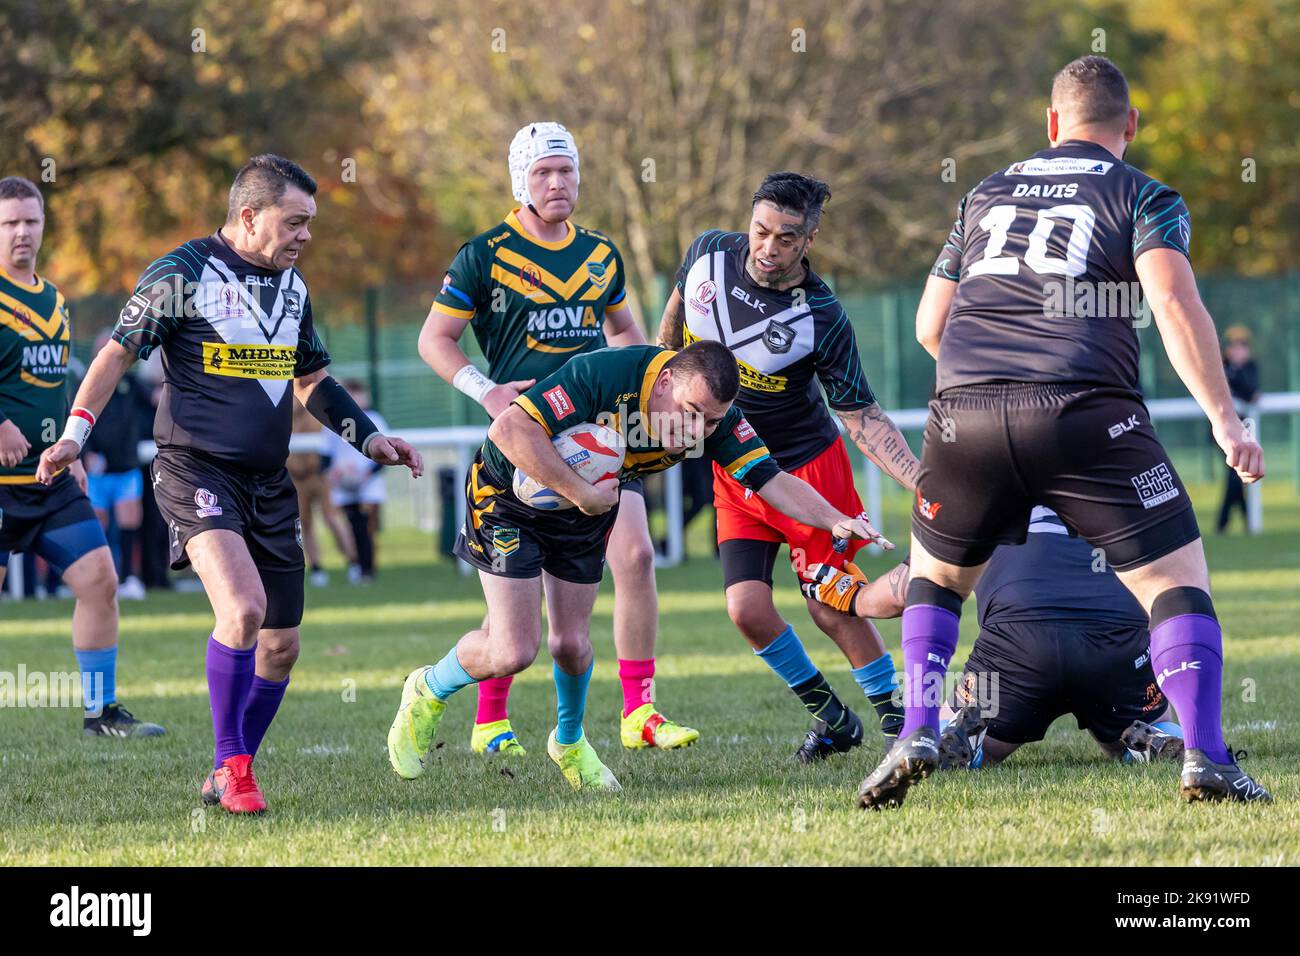 Warrington, Cheshire, UK. 25th Oct, 2022. Australia took on New Zealand in the Physical Disability Rugby League World Cup at Victoria Park, Warrington. Credit: John Hopkins/Alamy Live News Stock Photo